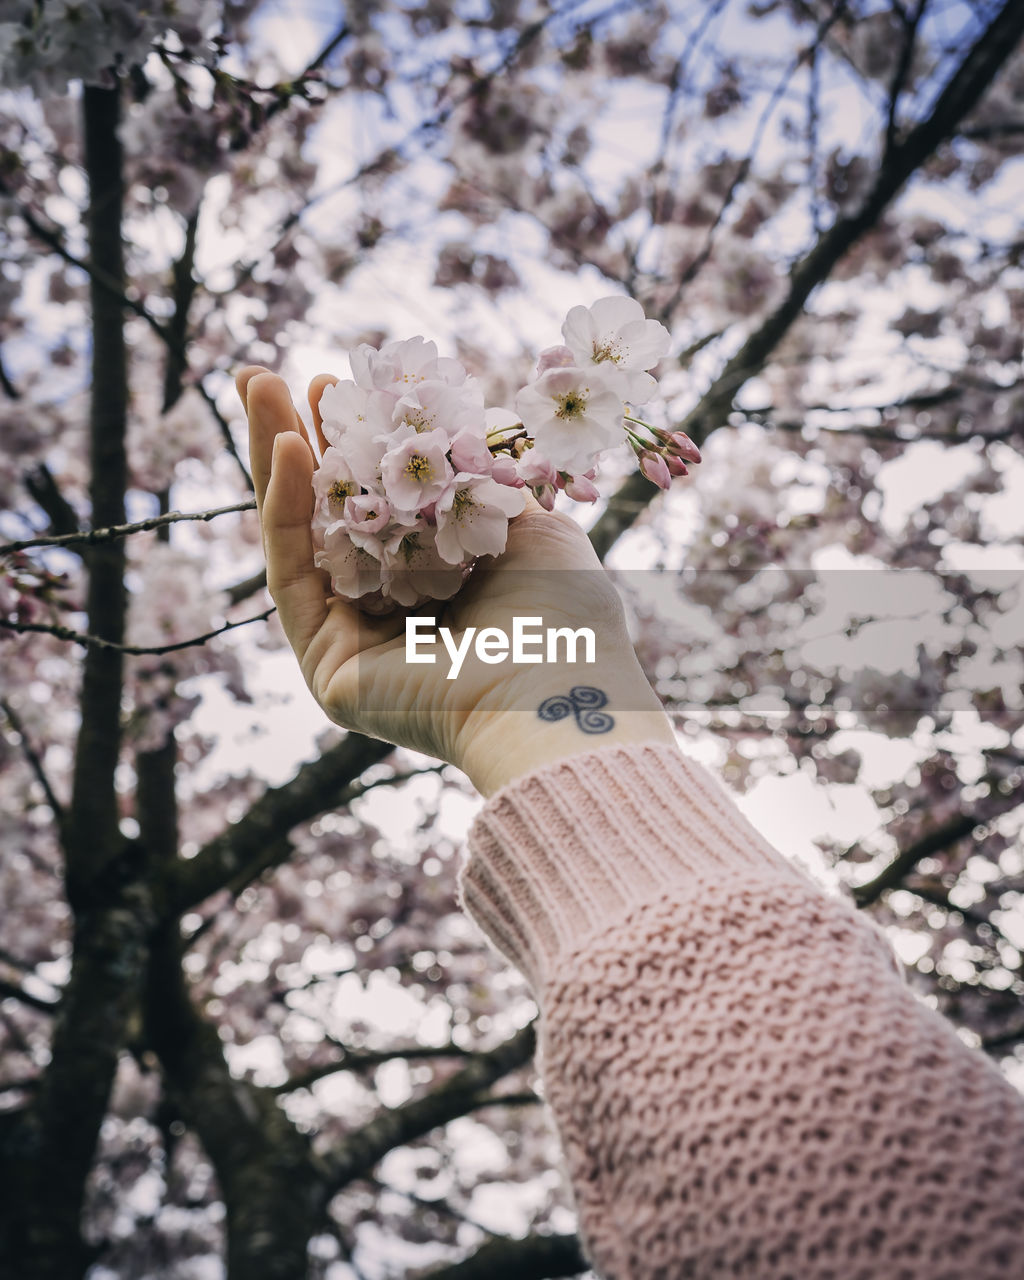 Cropped hand of woman holding flowers on branches